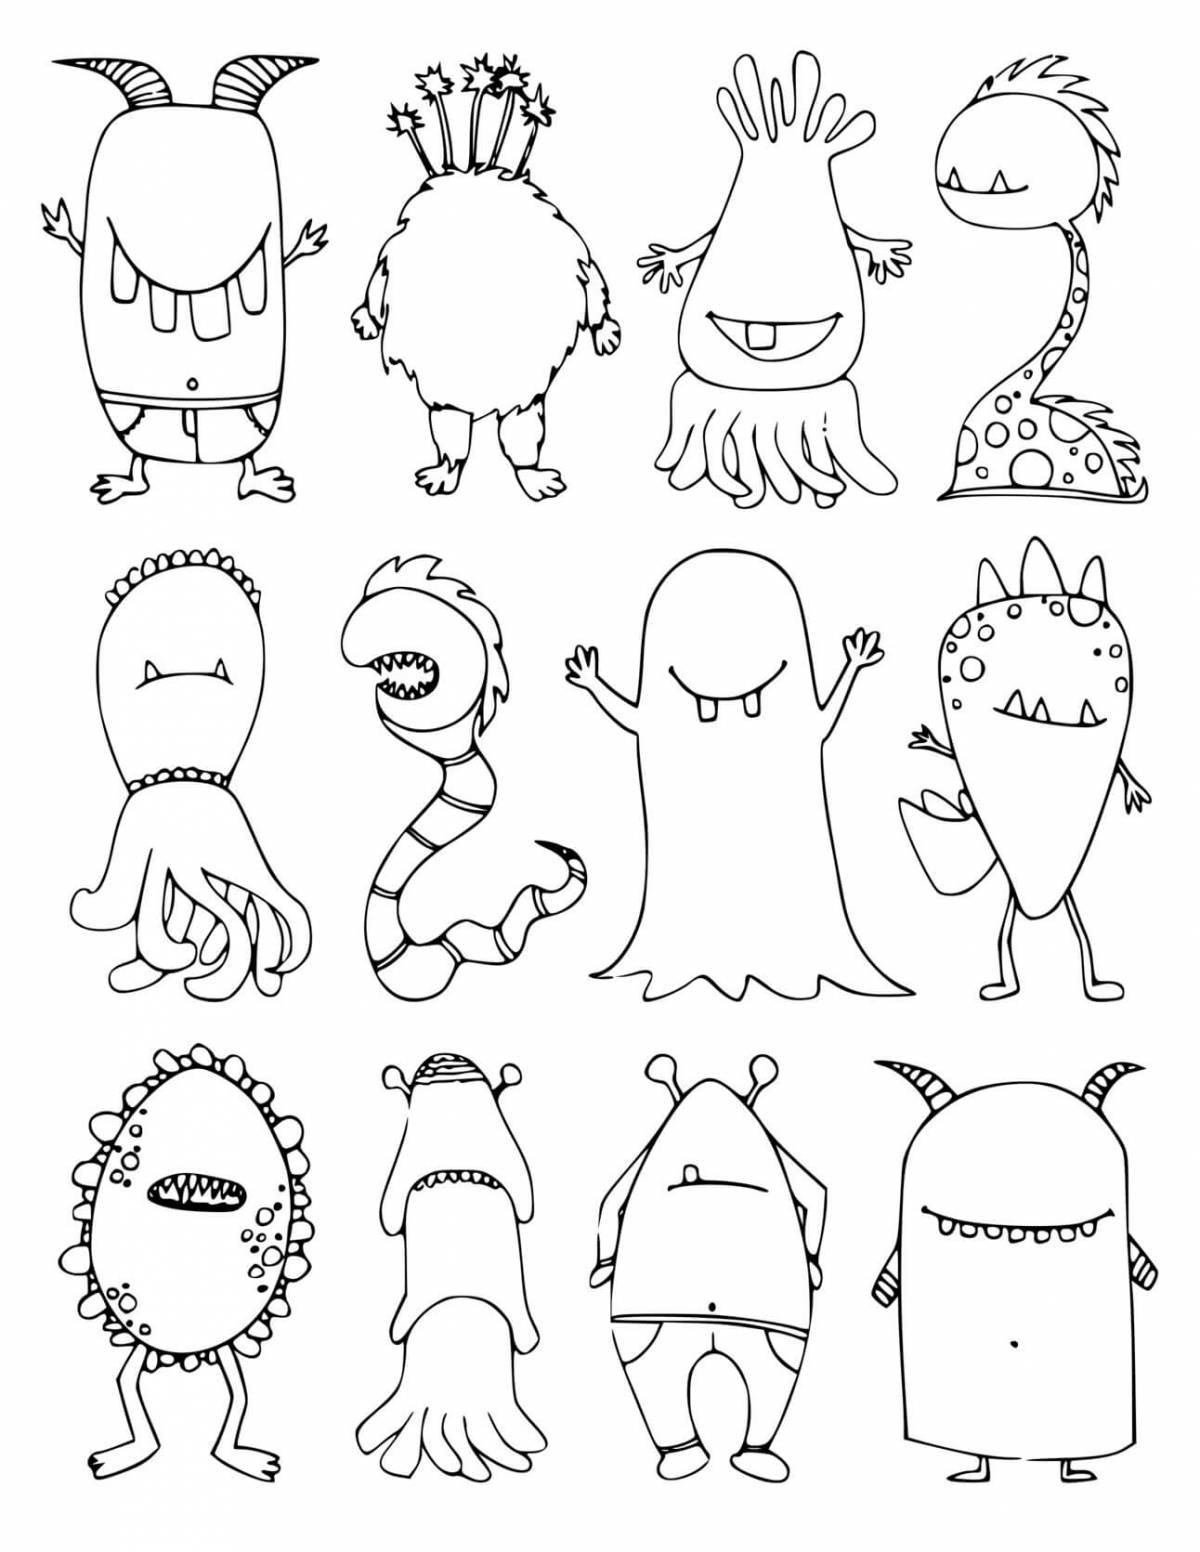 Rebellious monsters coloring pages